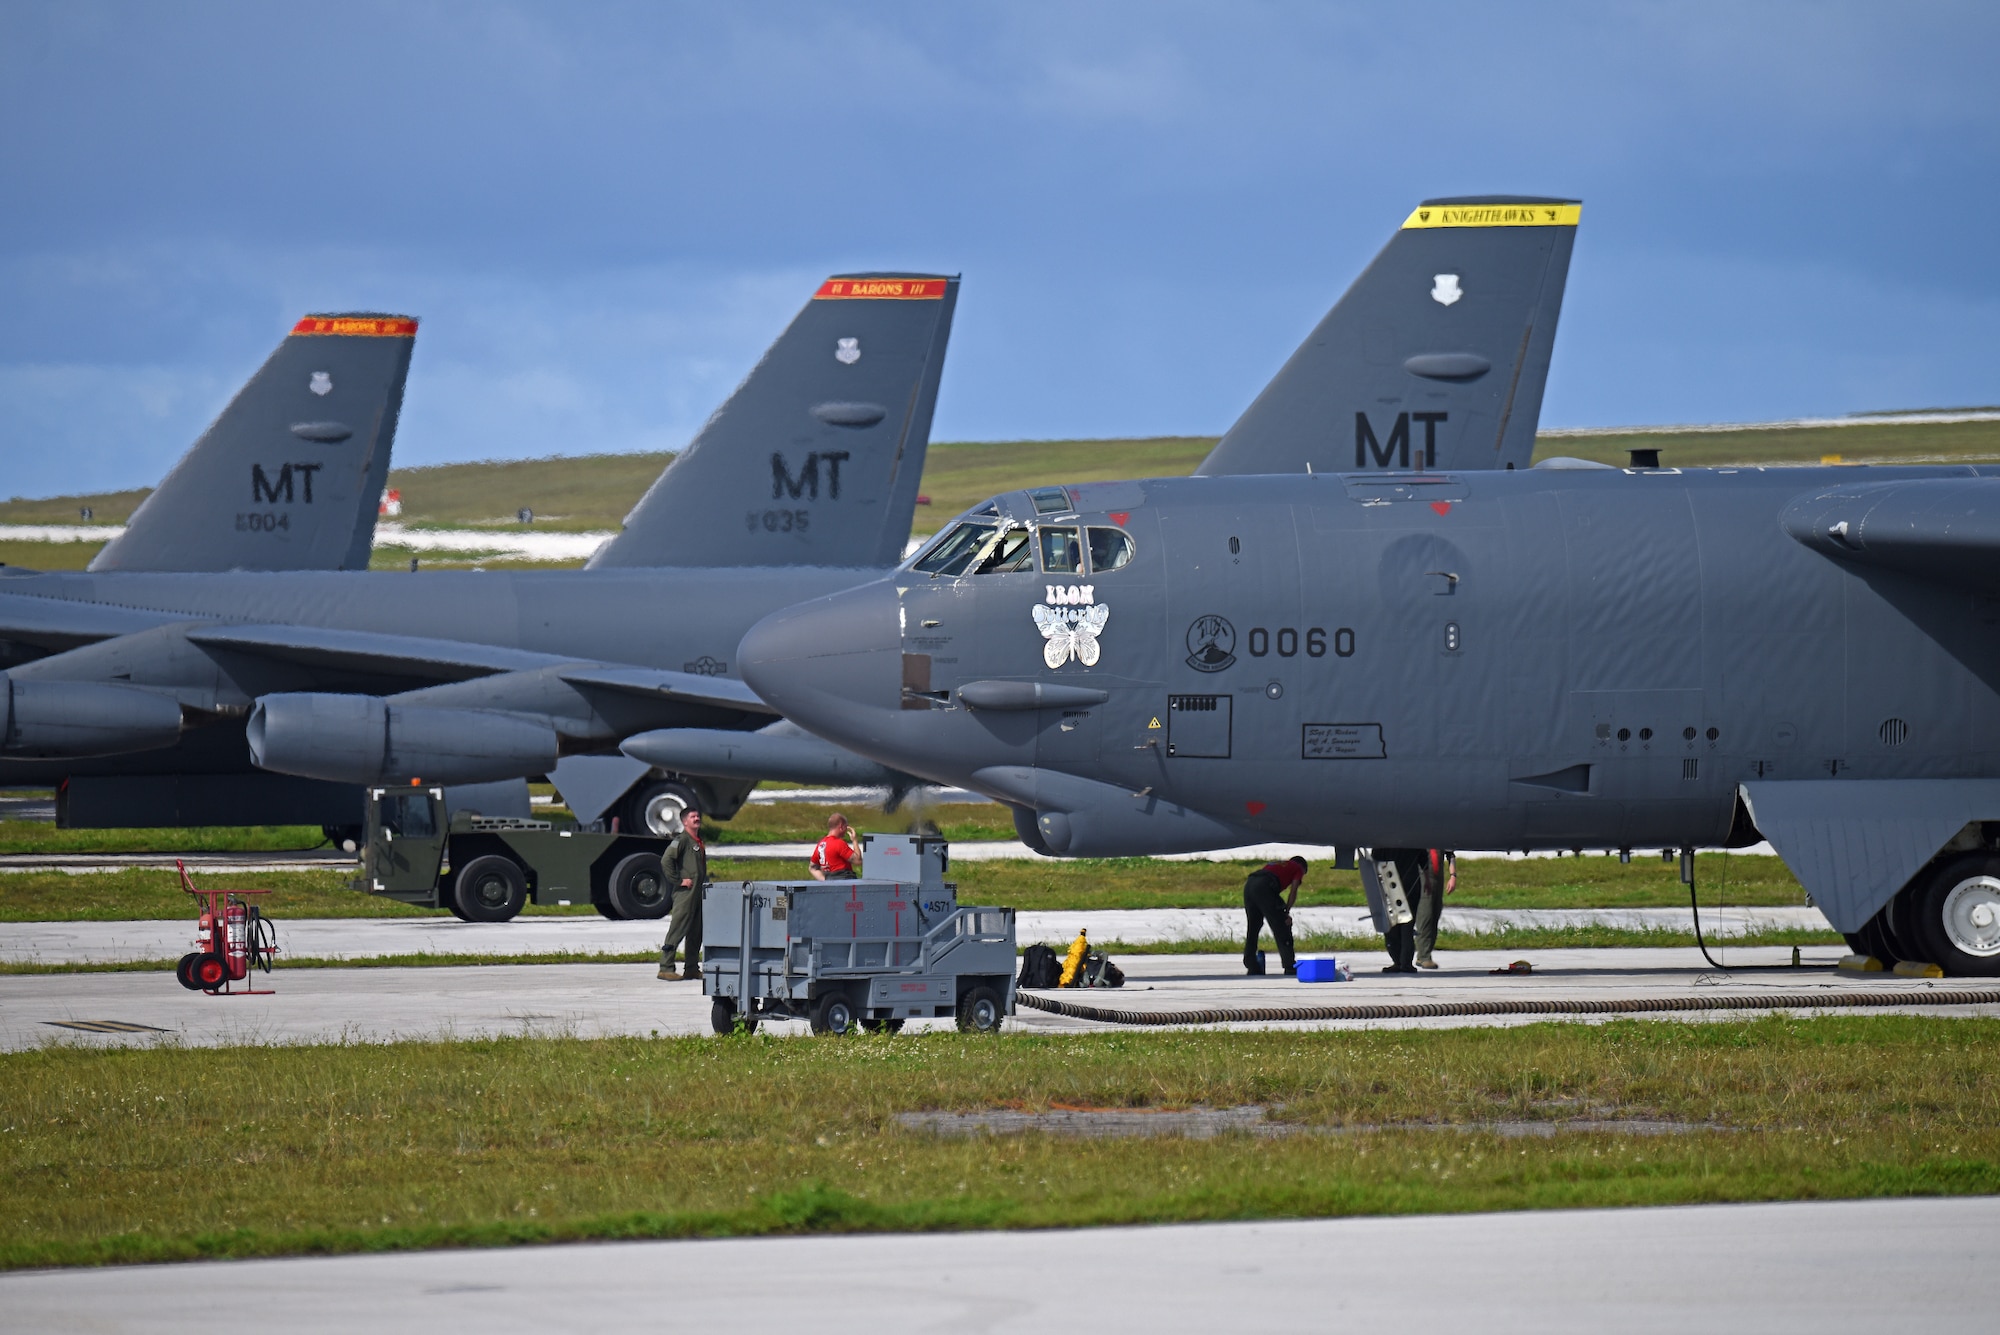 B-52 Stratofortress bombers from the 69th Expeditionary Bomb Squadron, deployed from Minot Air Force Base, North Dakota, park on a flightline July 12, 2019, at Andersen Air Force Base, Guam.